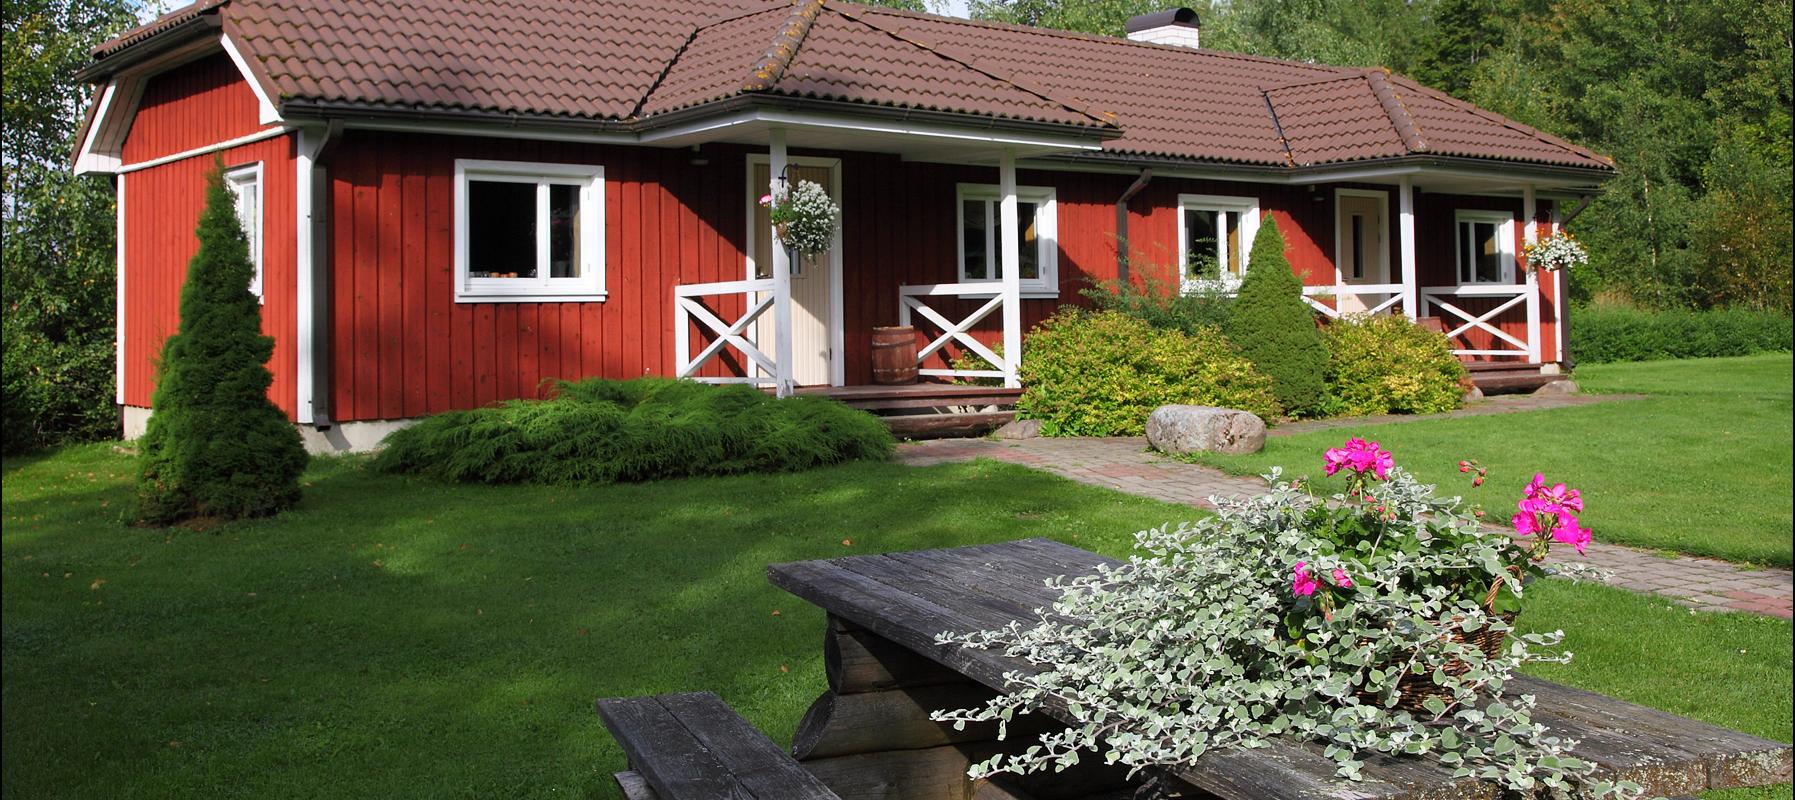 Klaara-Manni Holiday and Conference Centre